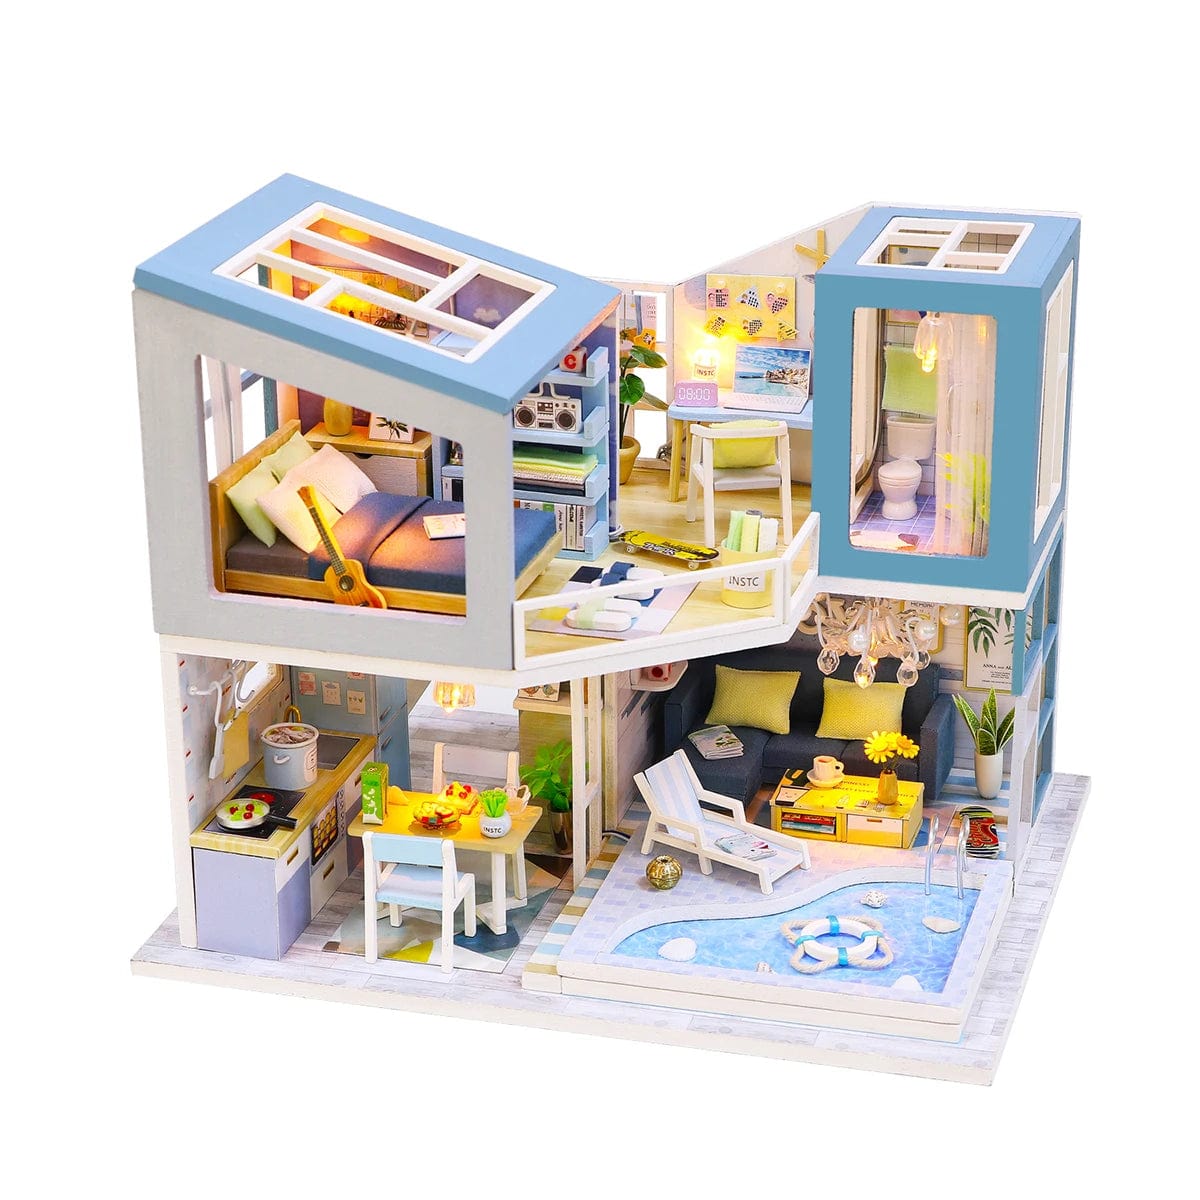 Pièces d'Exceptions Baby House Kit Mini DIY Handmade 3D Puzzle Assembly Building Villa Model Toys, Home Bedroom Decoration with Furniture Wooden Cra